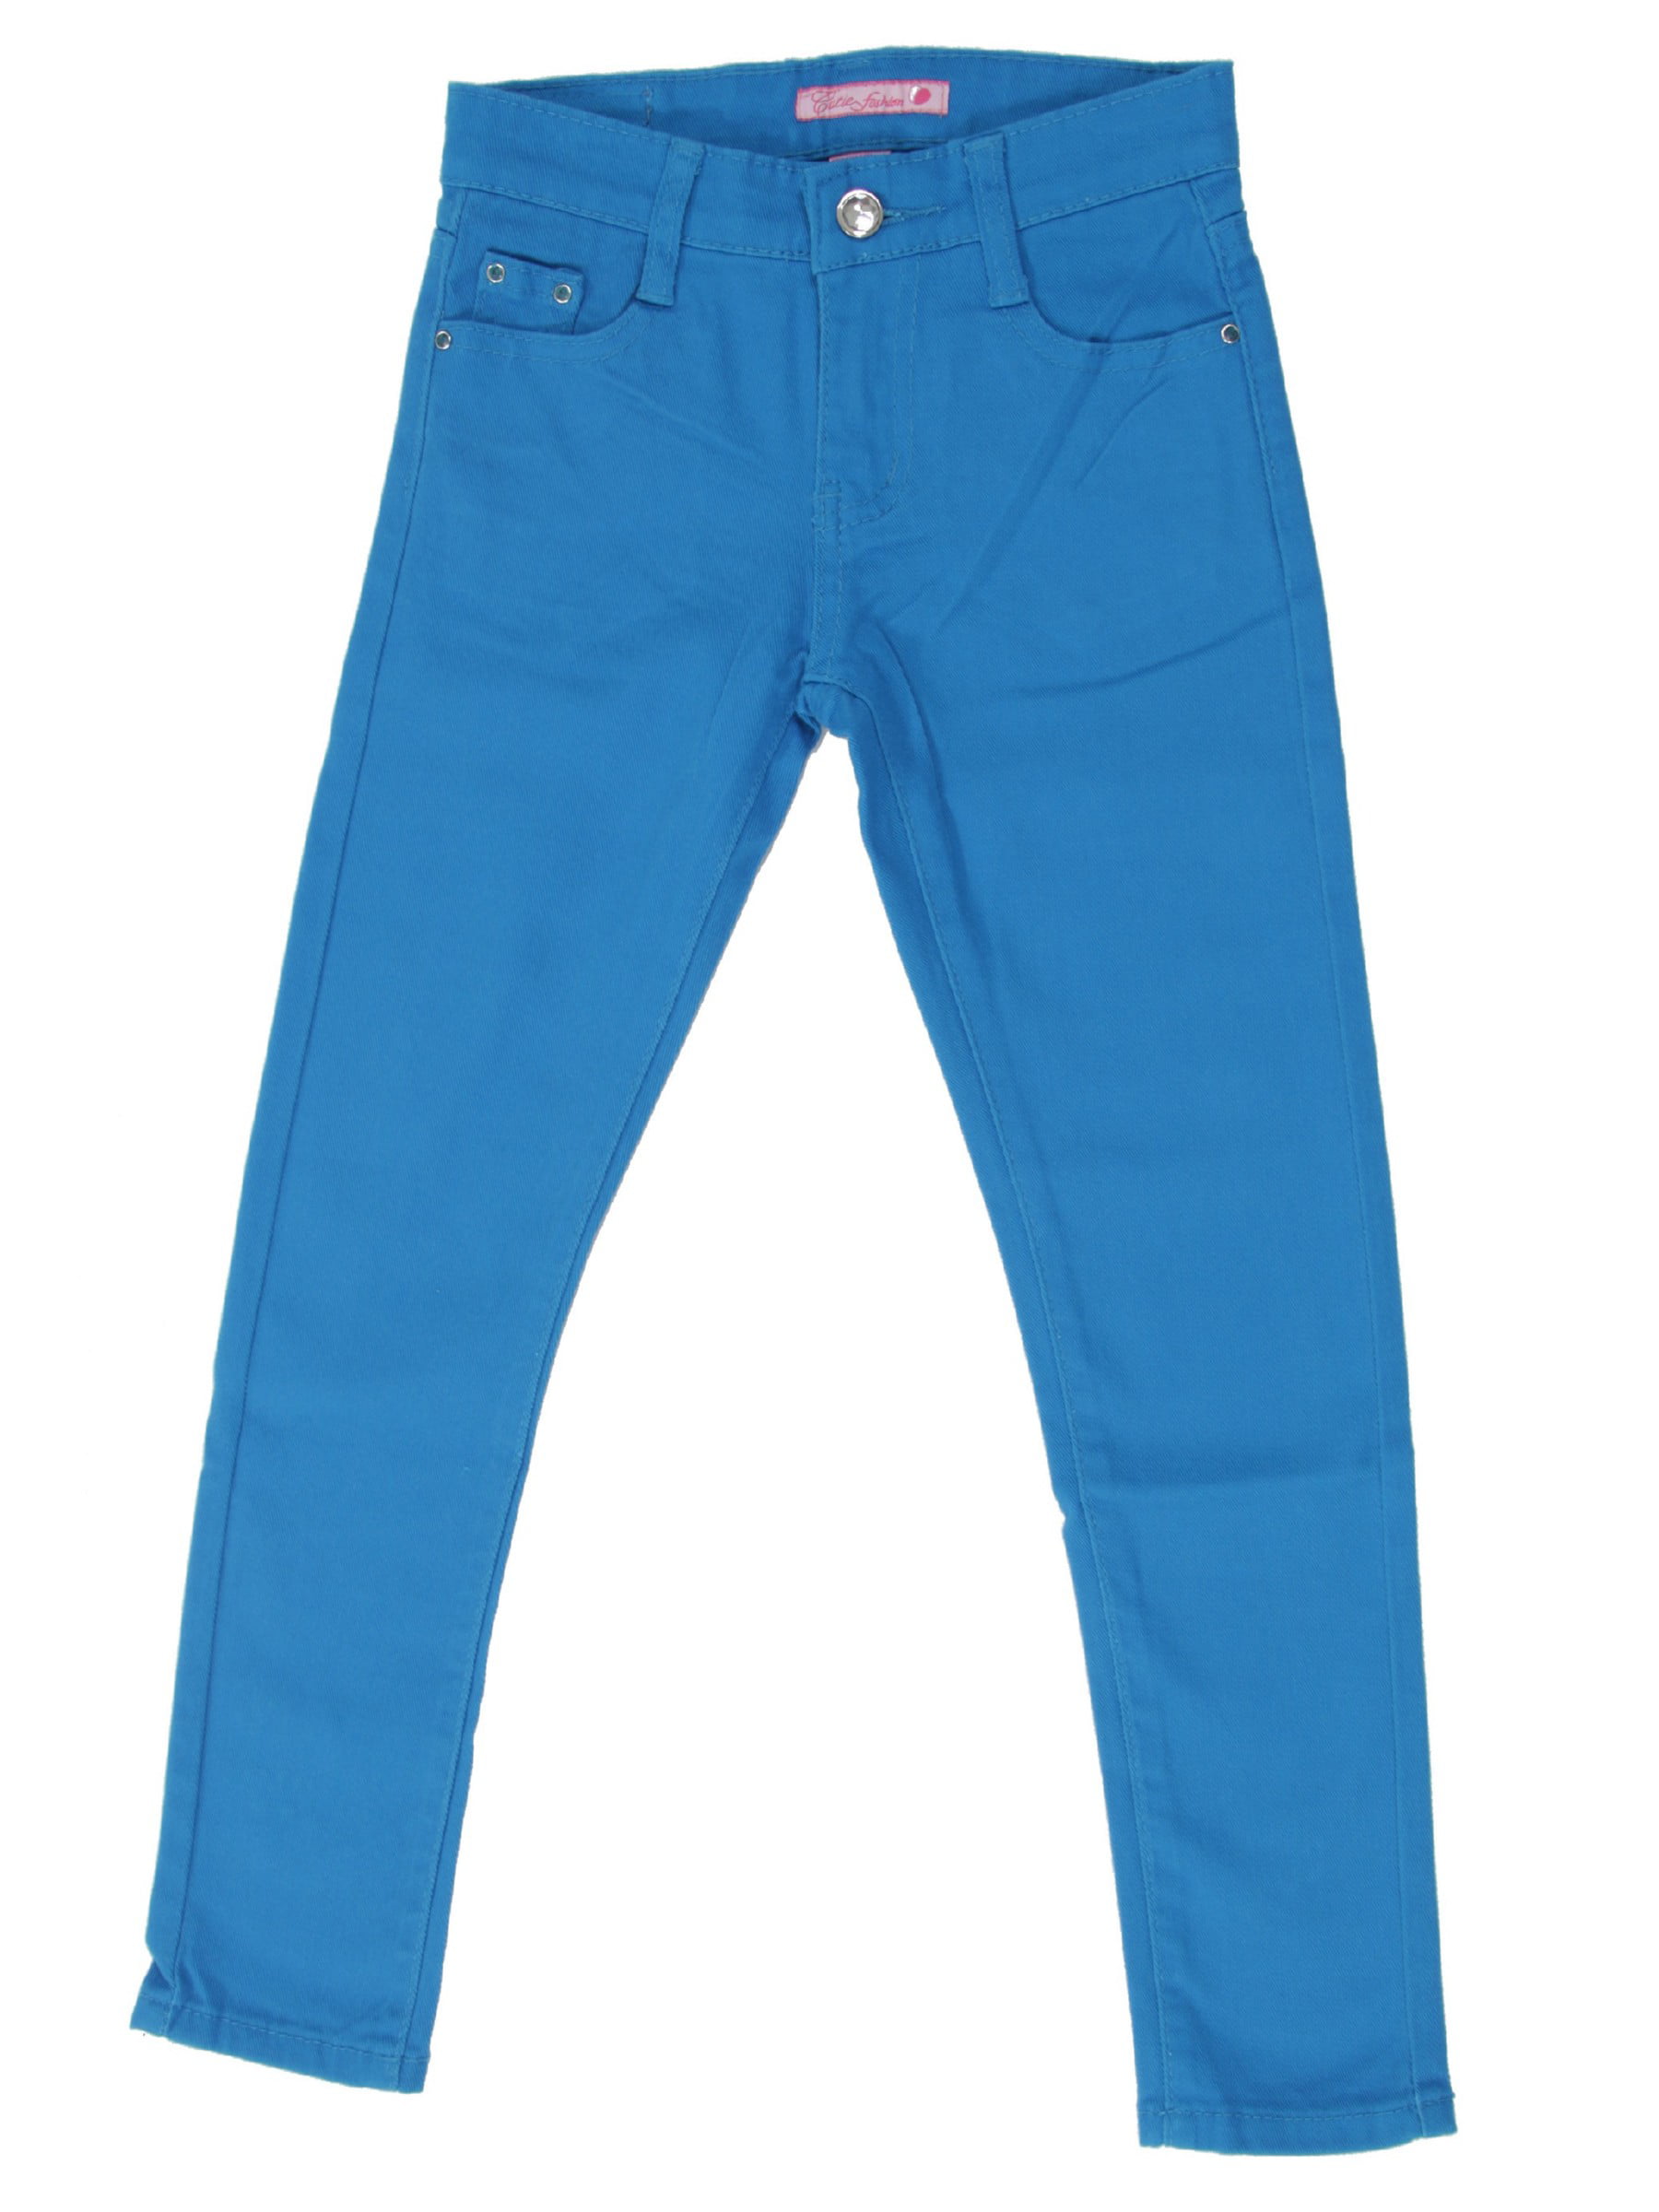 colored jeans for kids